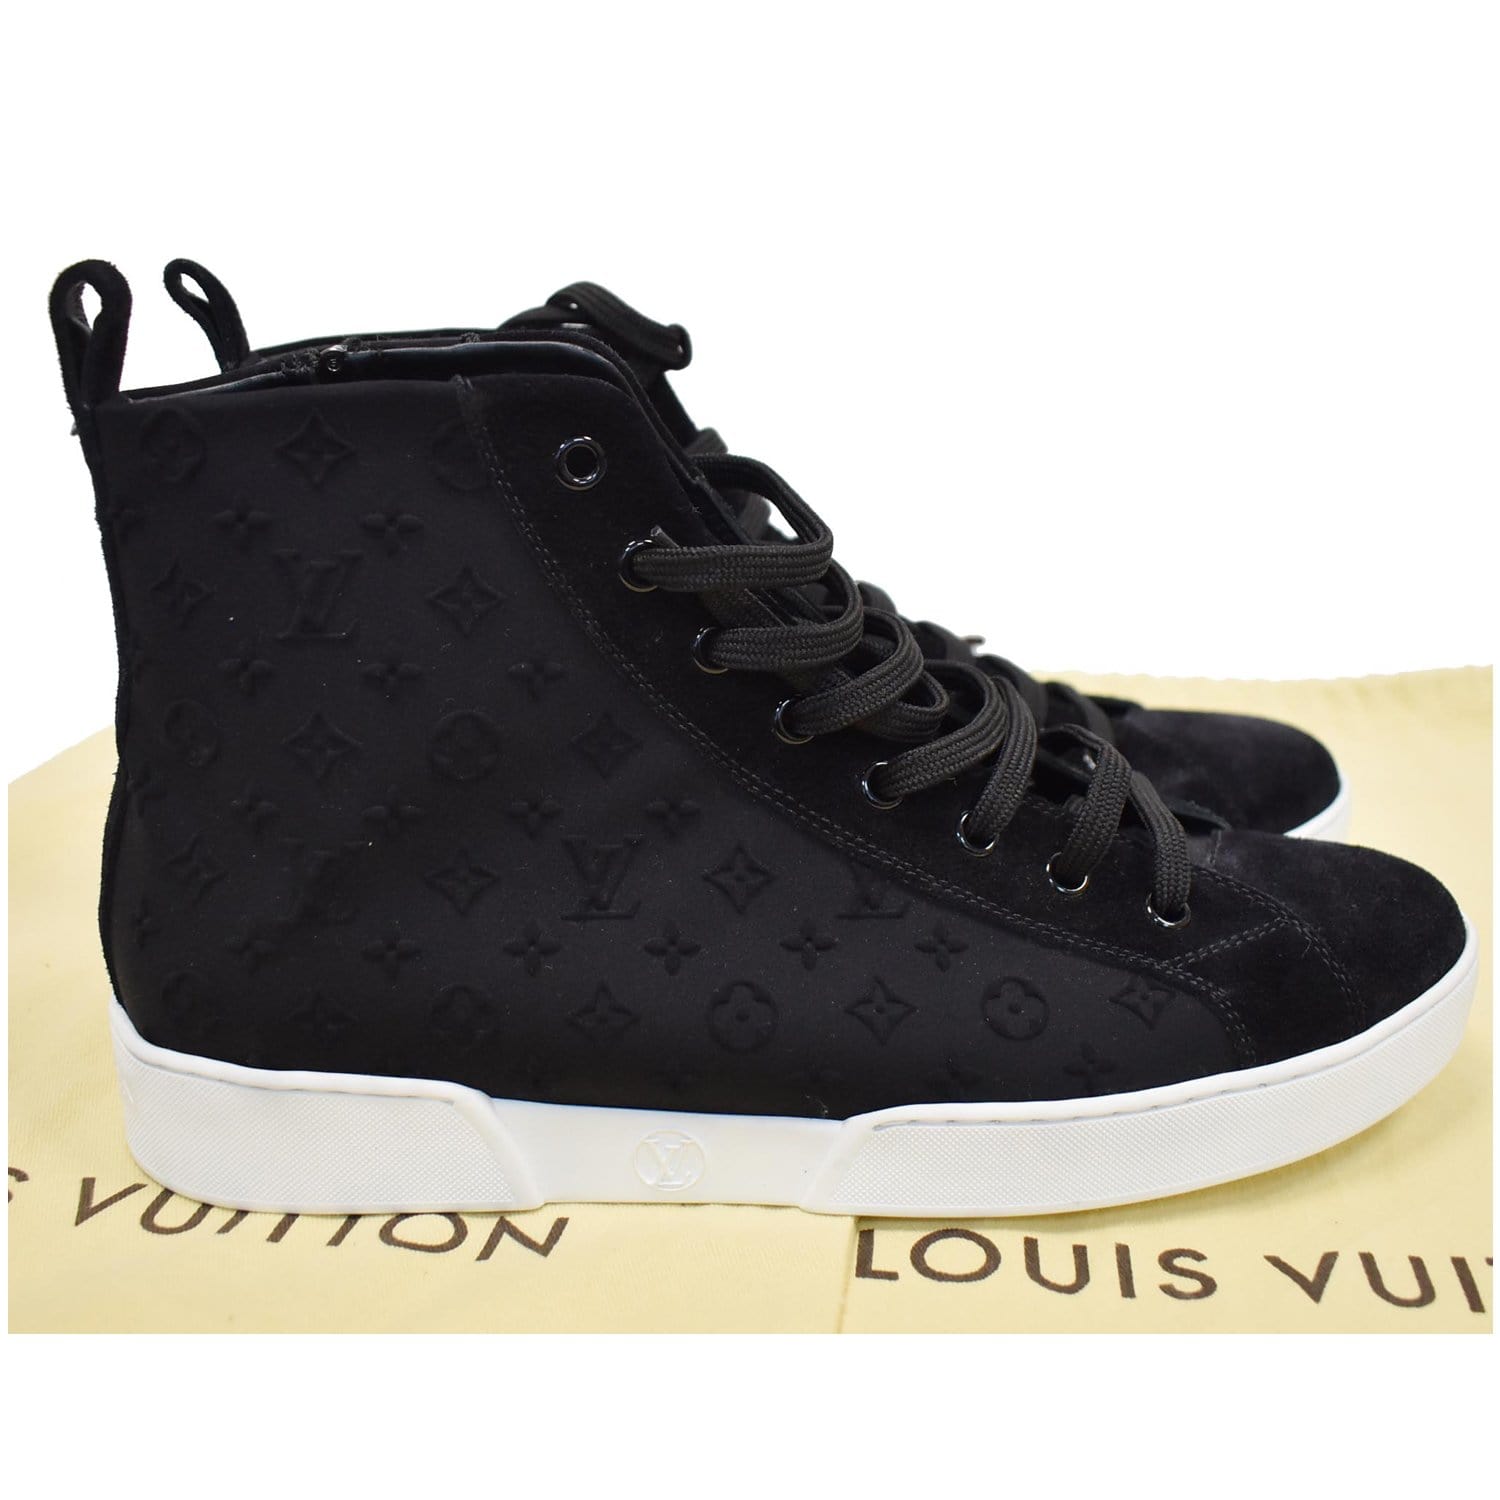 LOUIS VUITTON A/W 2012 Heroes Red Suede and Leather High Top